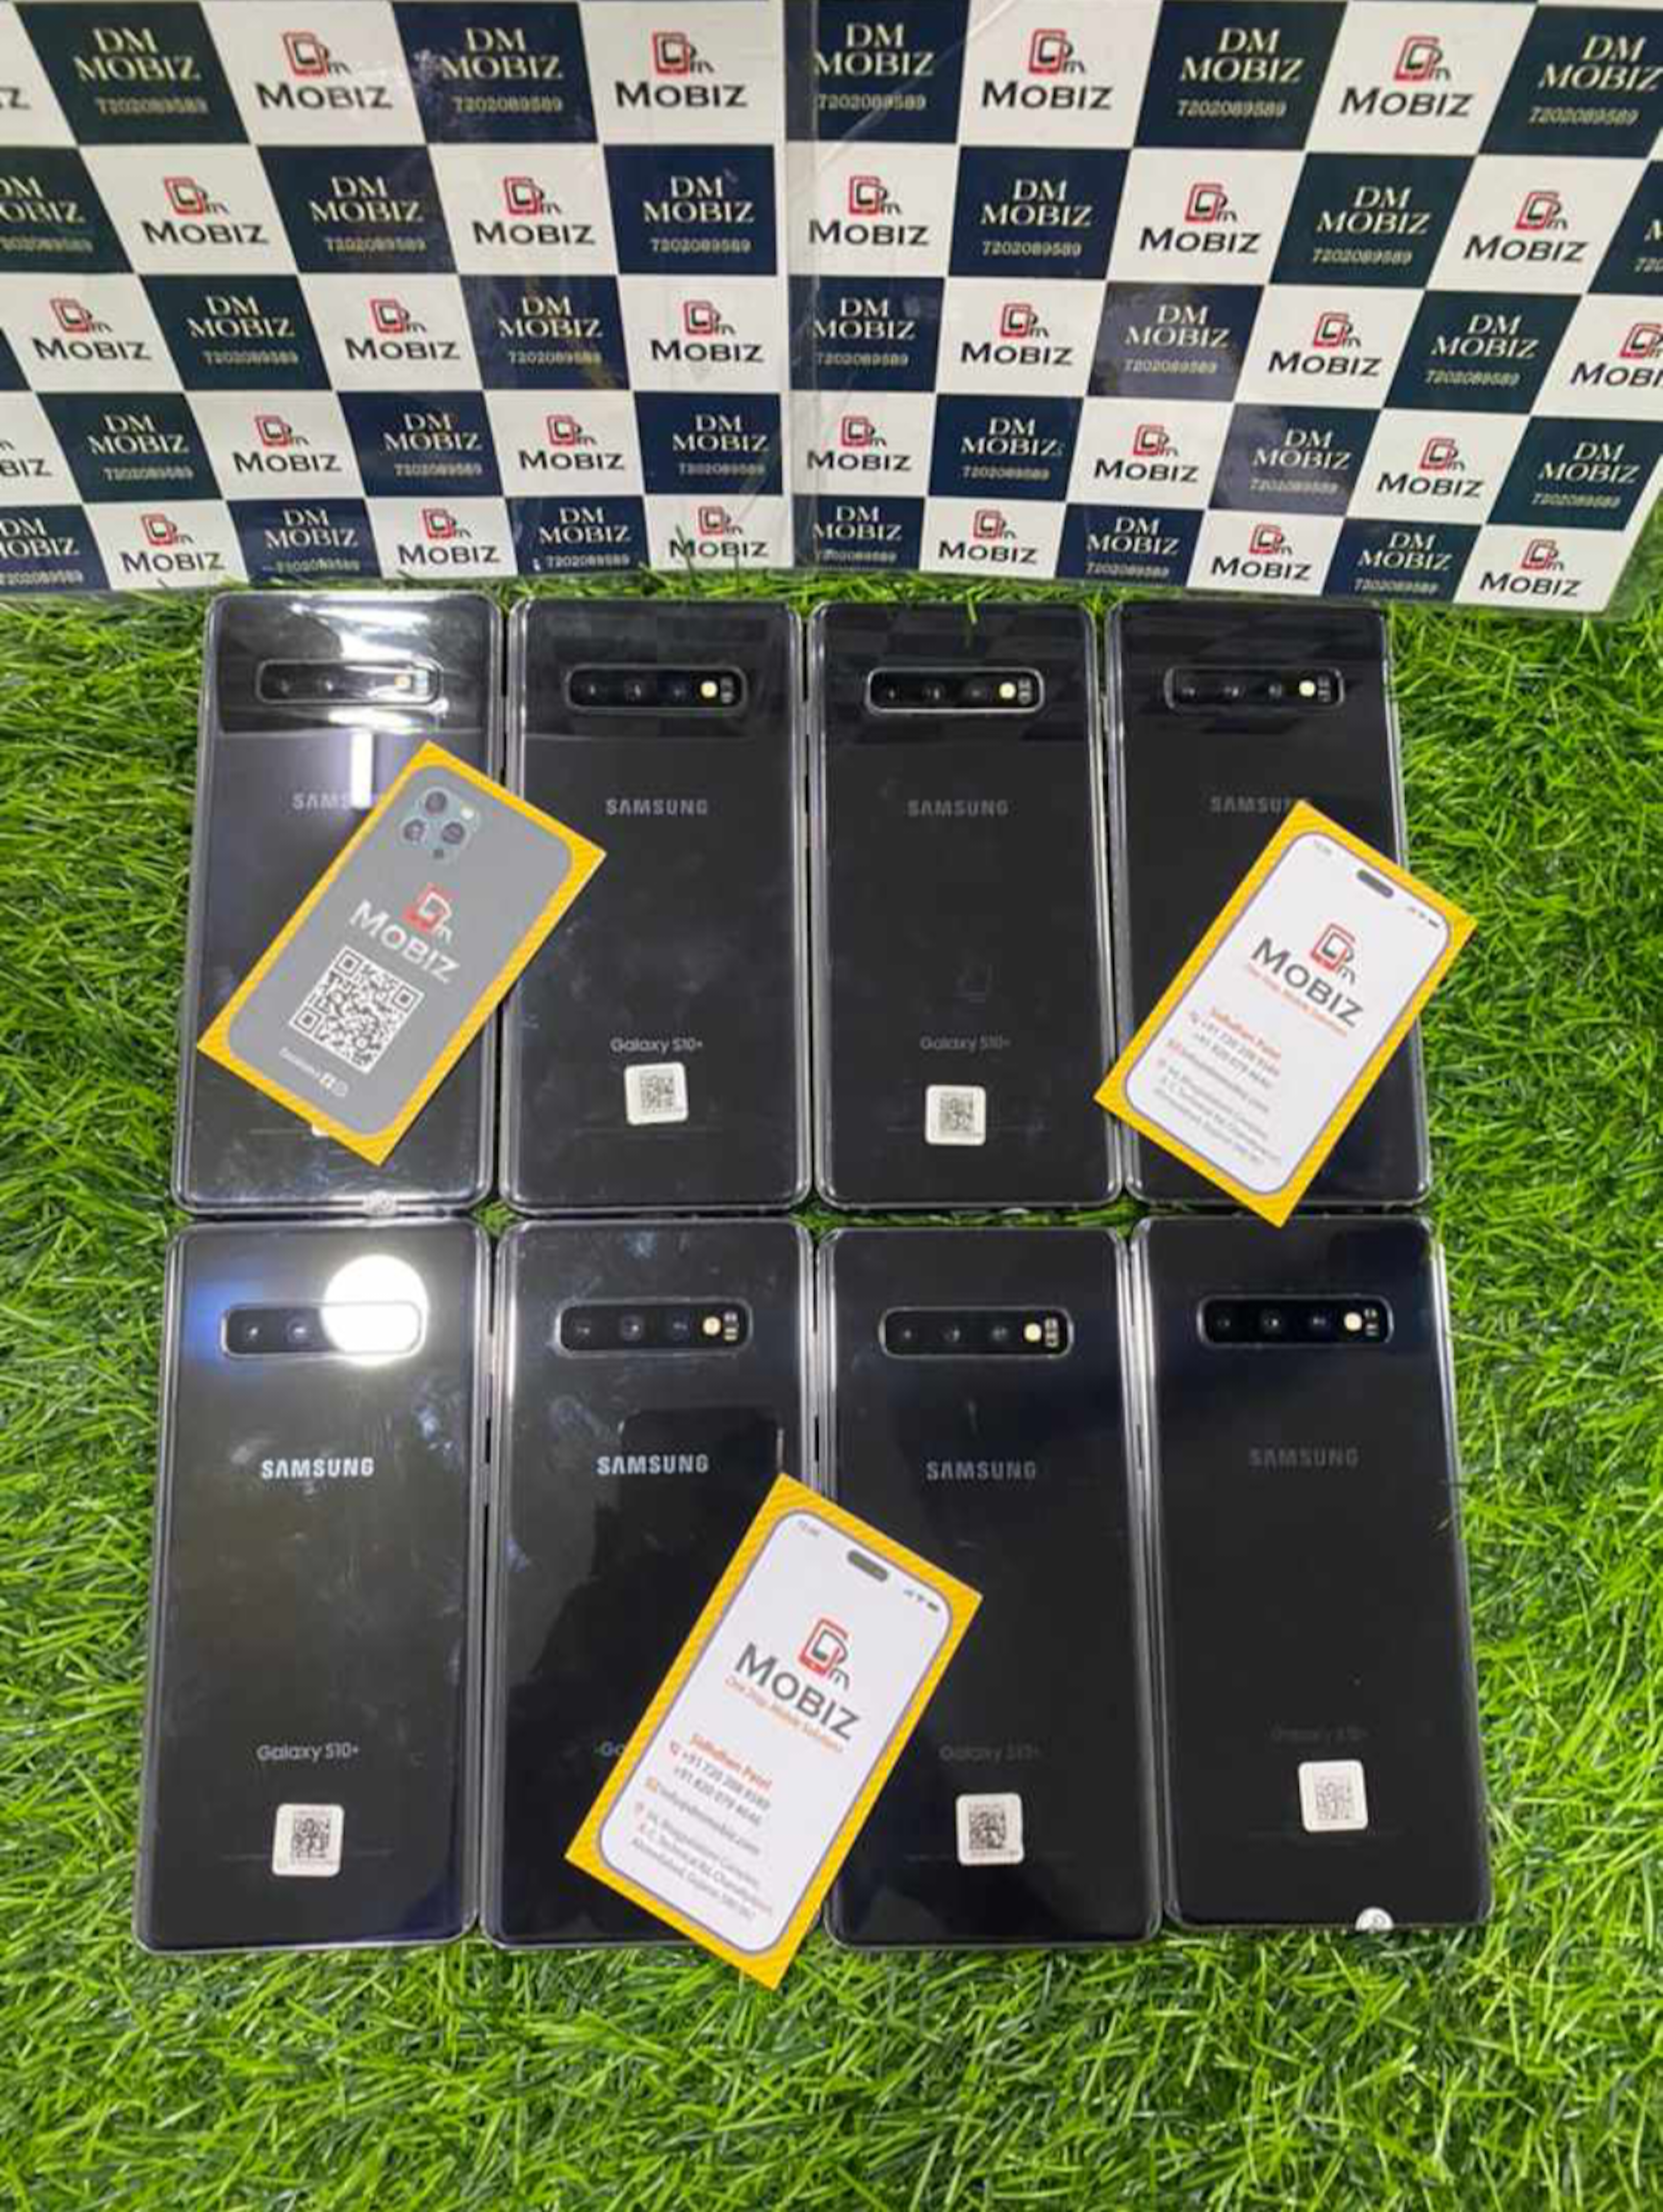 View - Samsung s10 plus photos, Samsung s10 plus available in Ahmedabad, make deal in 19999